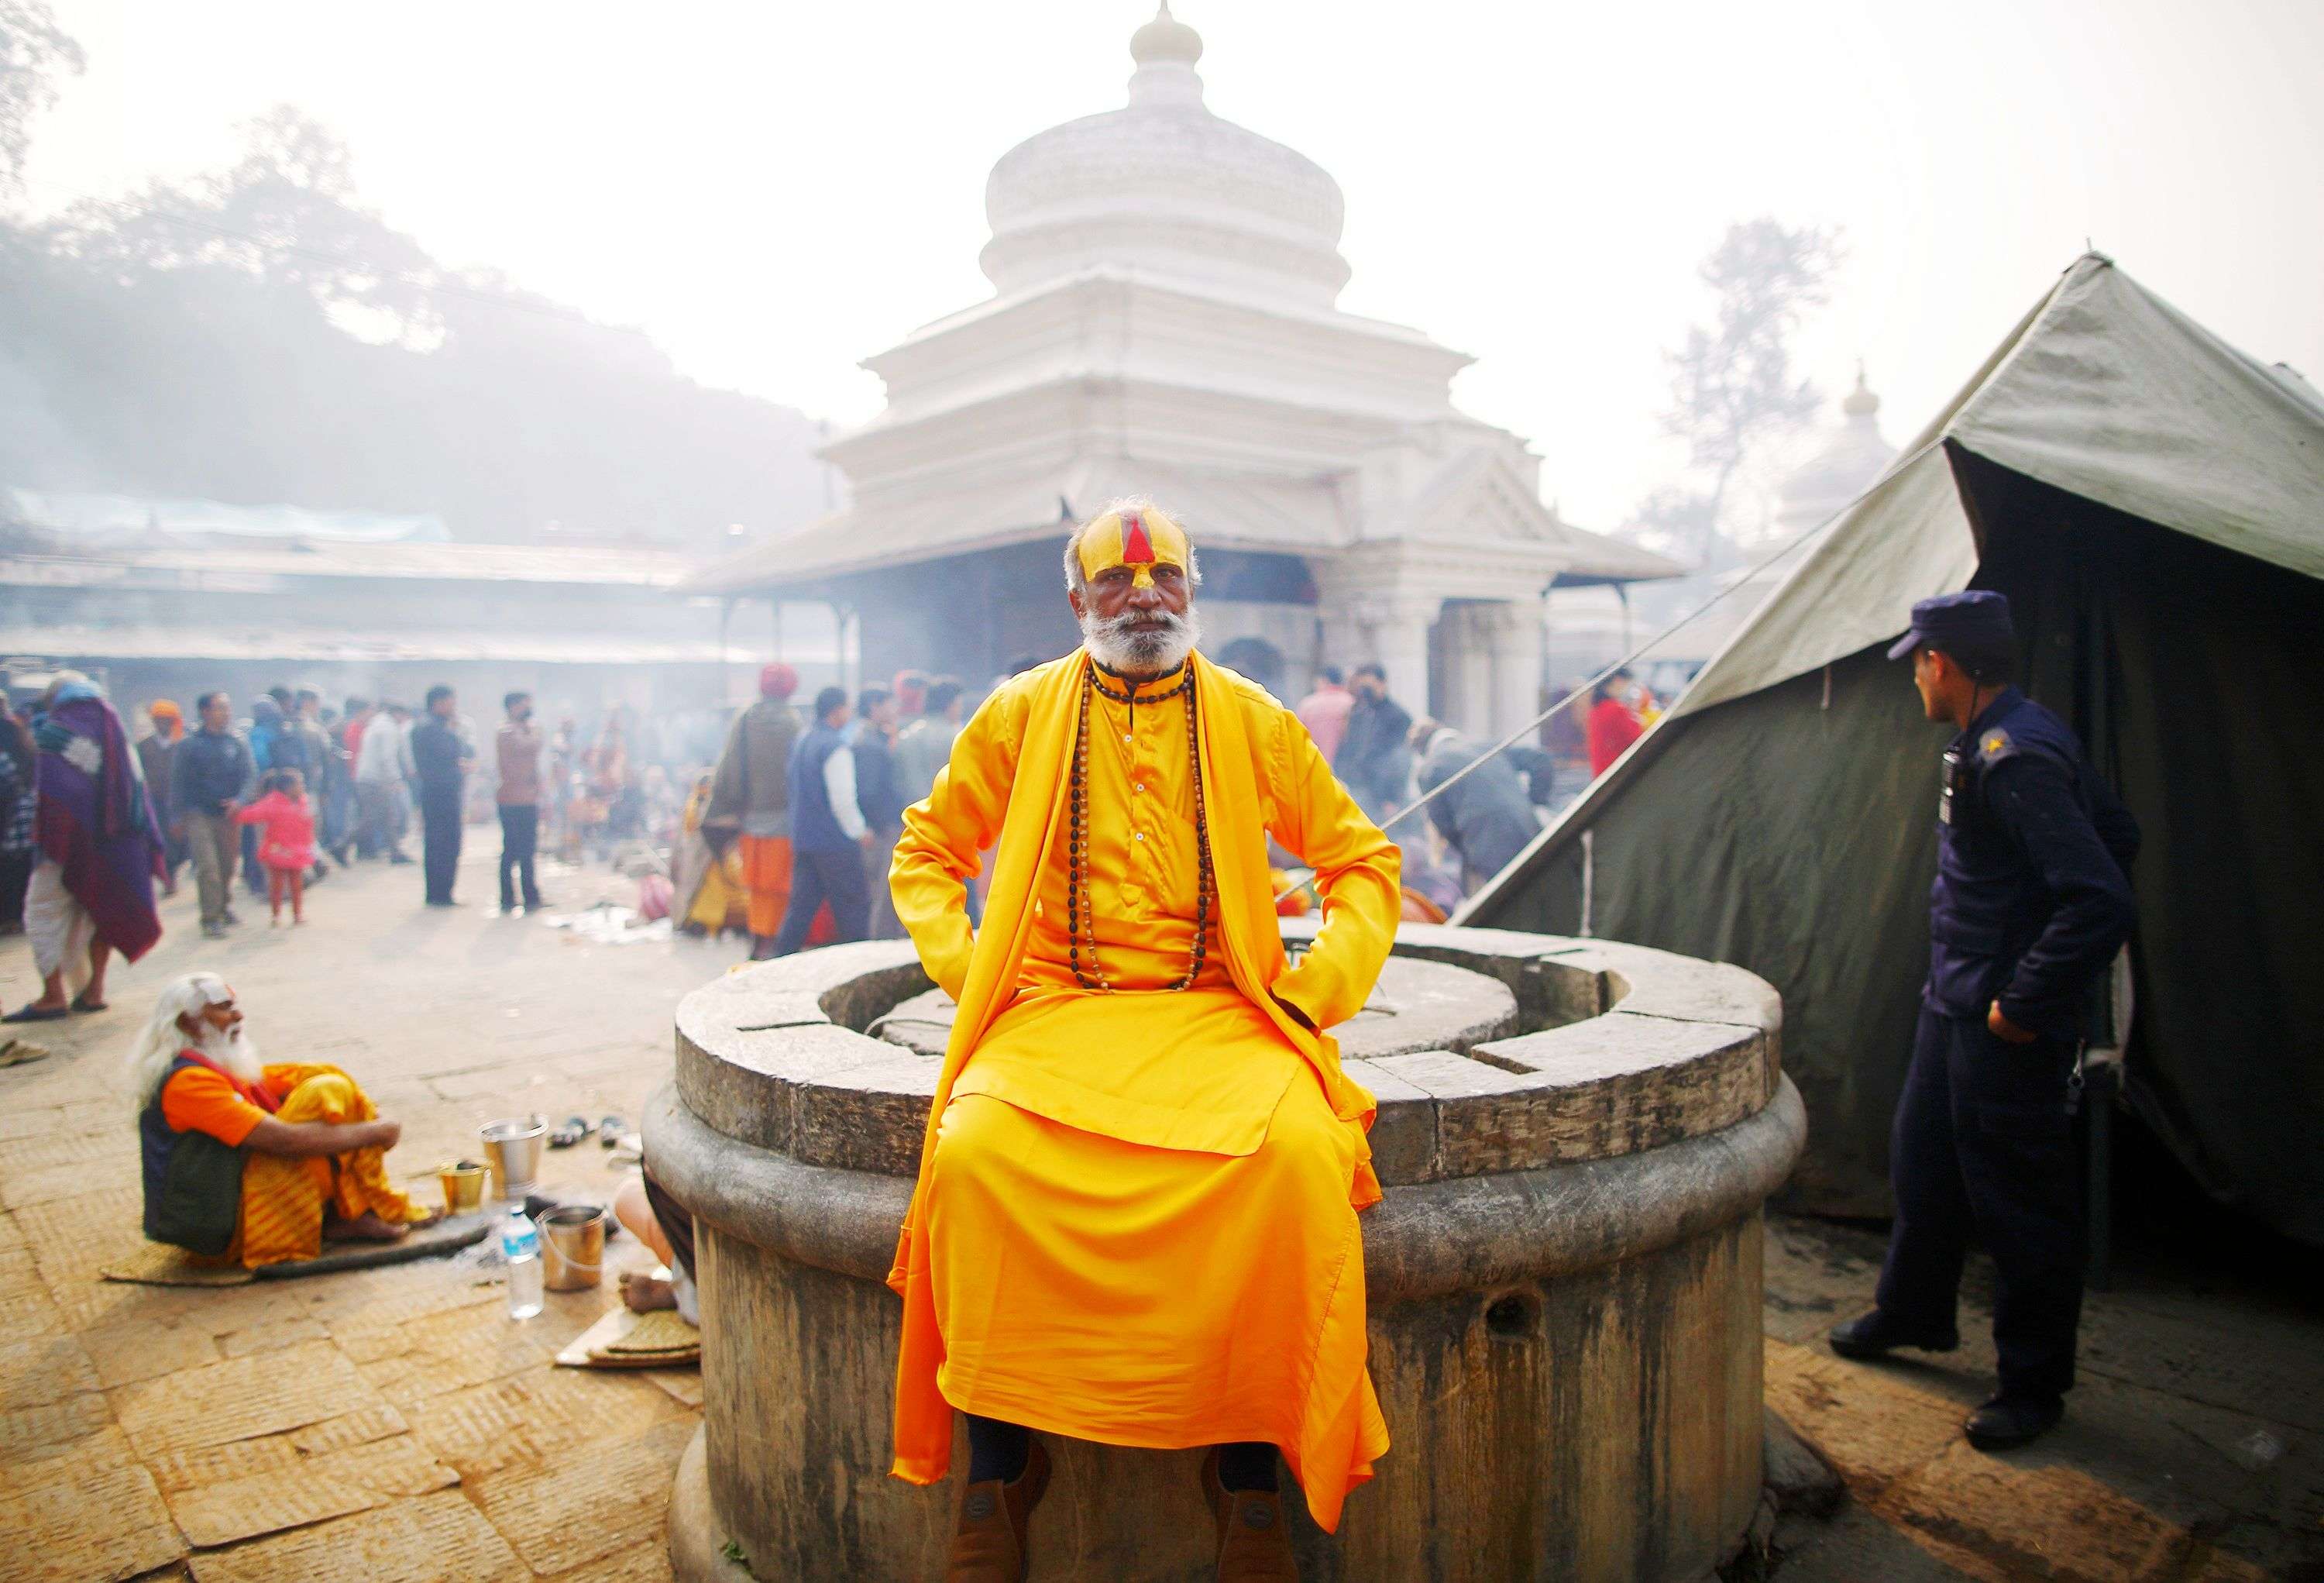 A sadhu sits on top of the well at the premises of Pashupatinath Temple in Kathmandu. (REUTERS/Navesh Chitrakar)